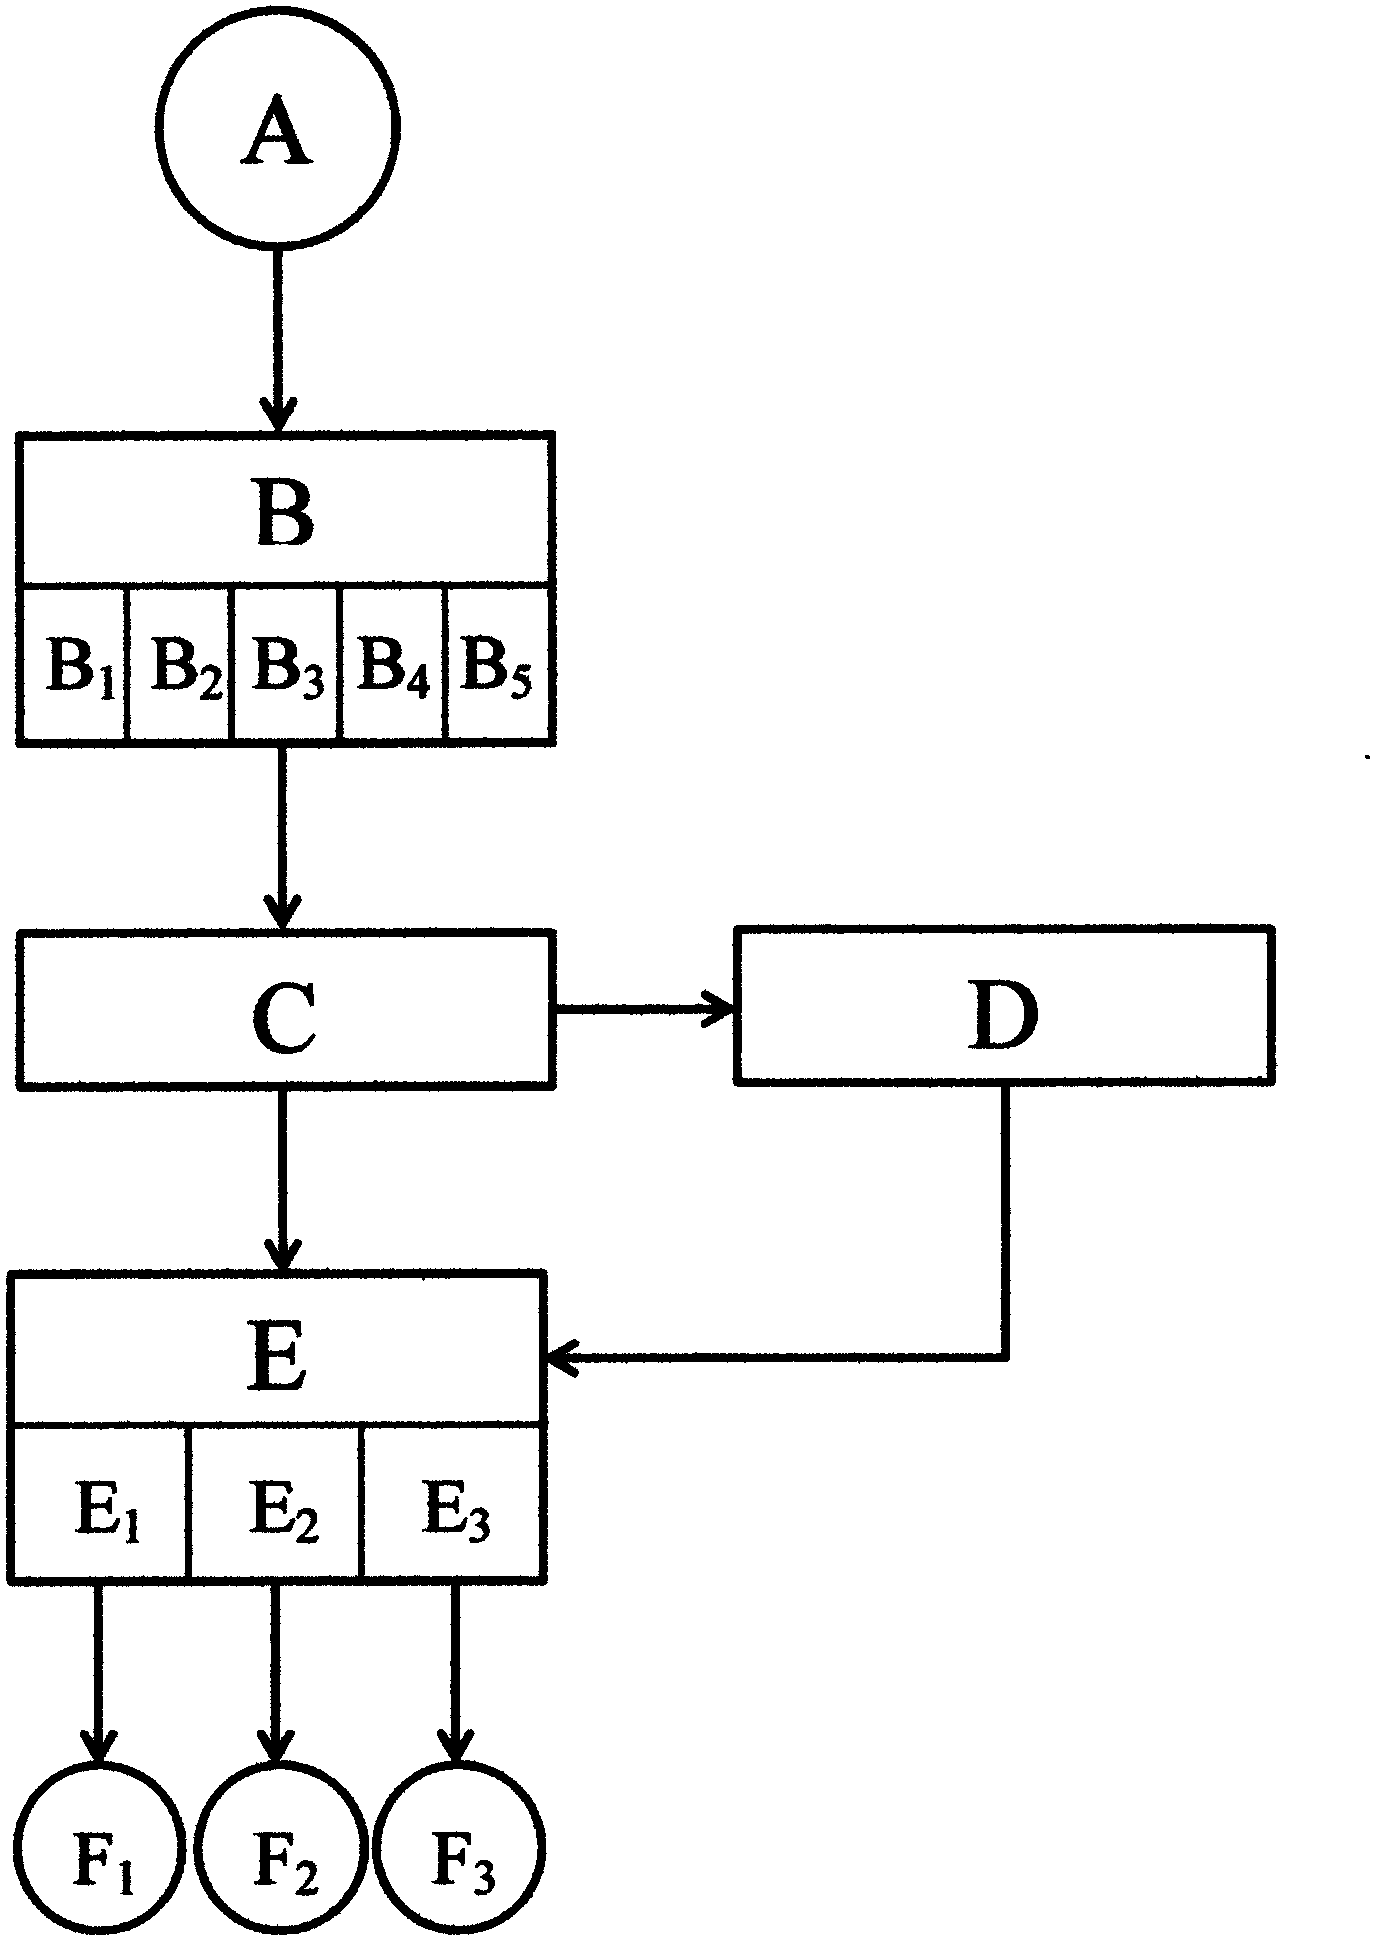 Method of recognizing language information by applying language rule by machine